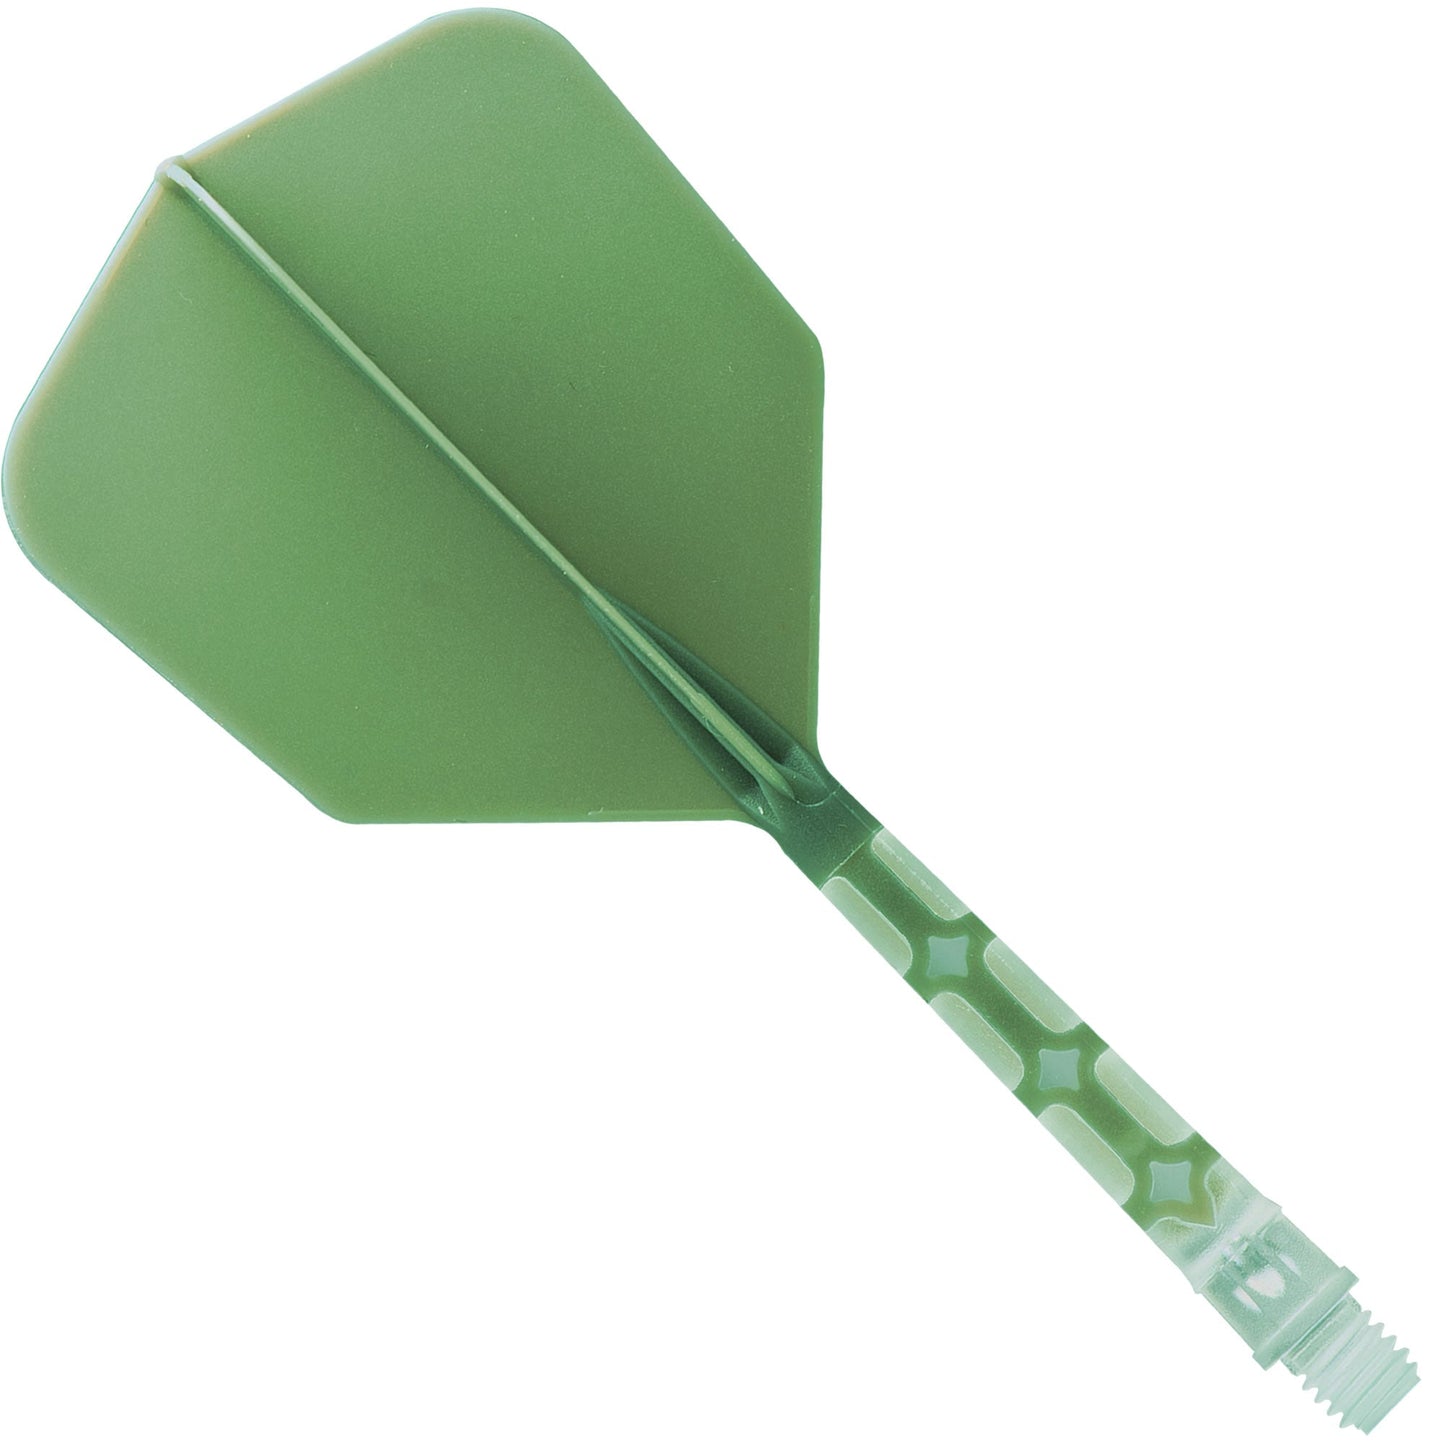 Cuesoul Rost T19 Integrated Dart Shaft and Flights - Big Wing - Clear with Green Flight Long